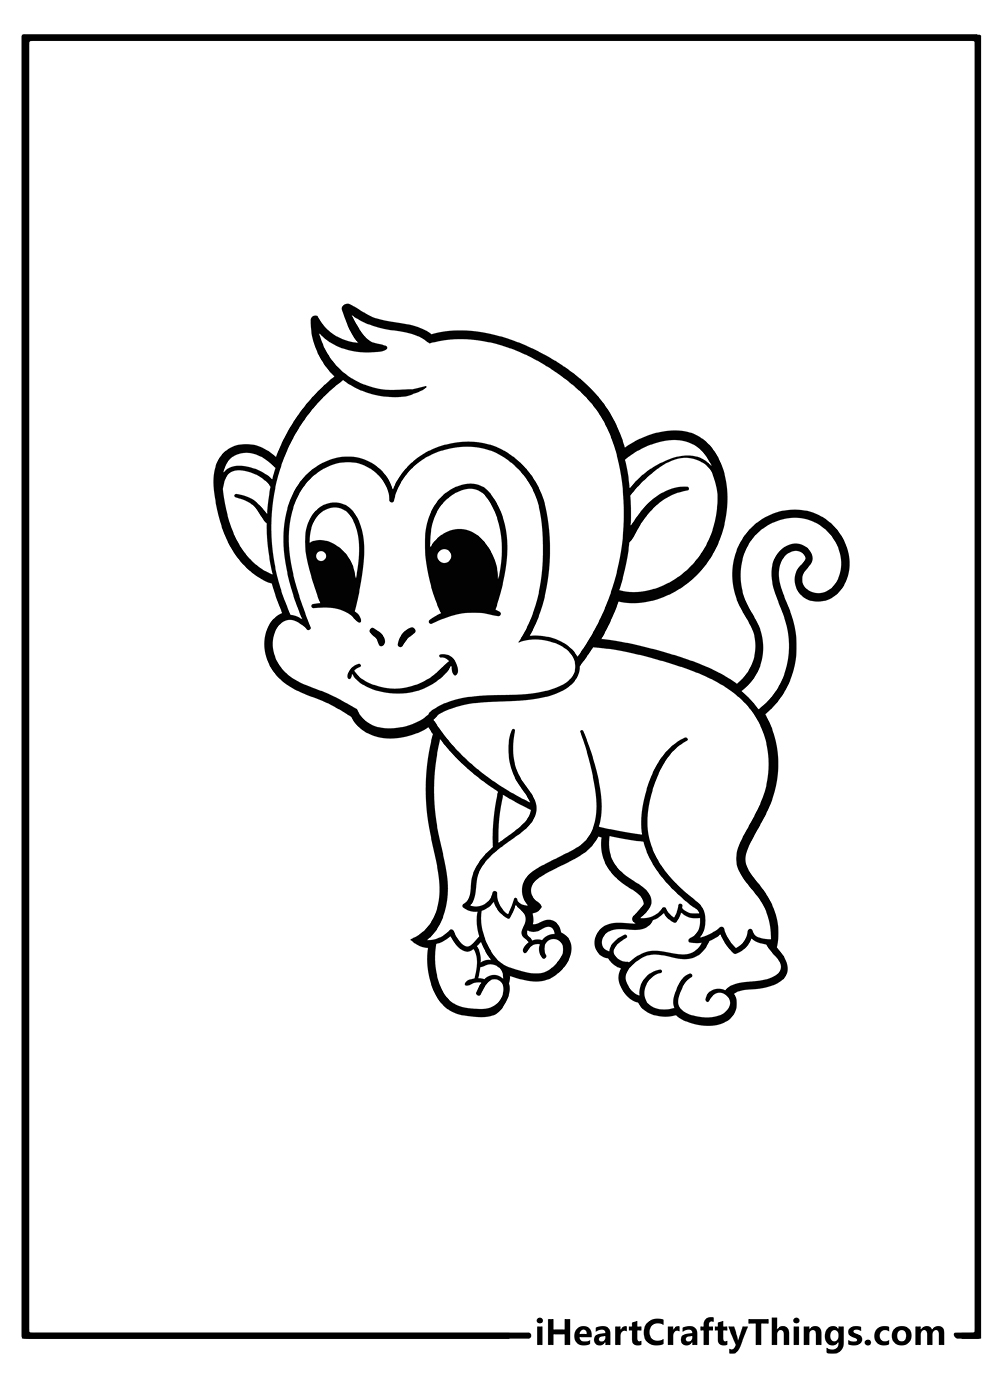 Cute Little Monkey Outline Coloring Page for Kids Animal Coloring Book  Cartoon Vector Illustration 7174474 Vector Art at Vecteezy